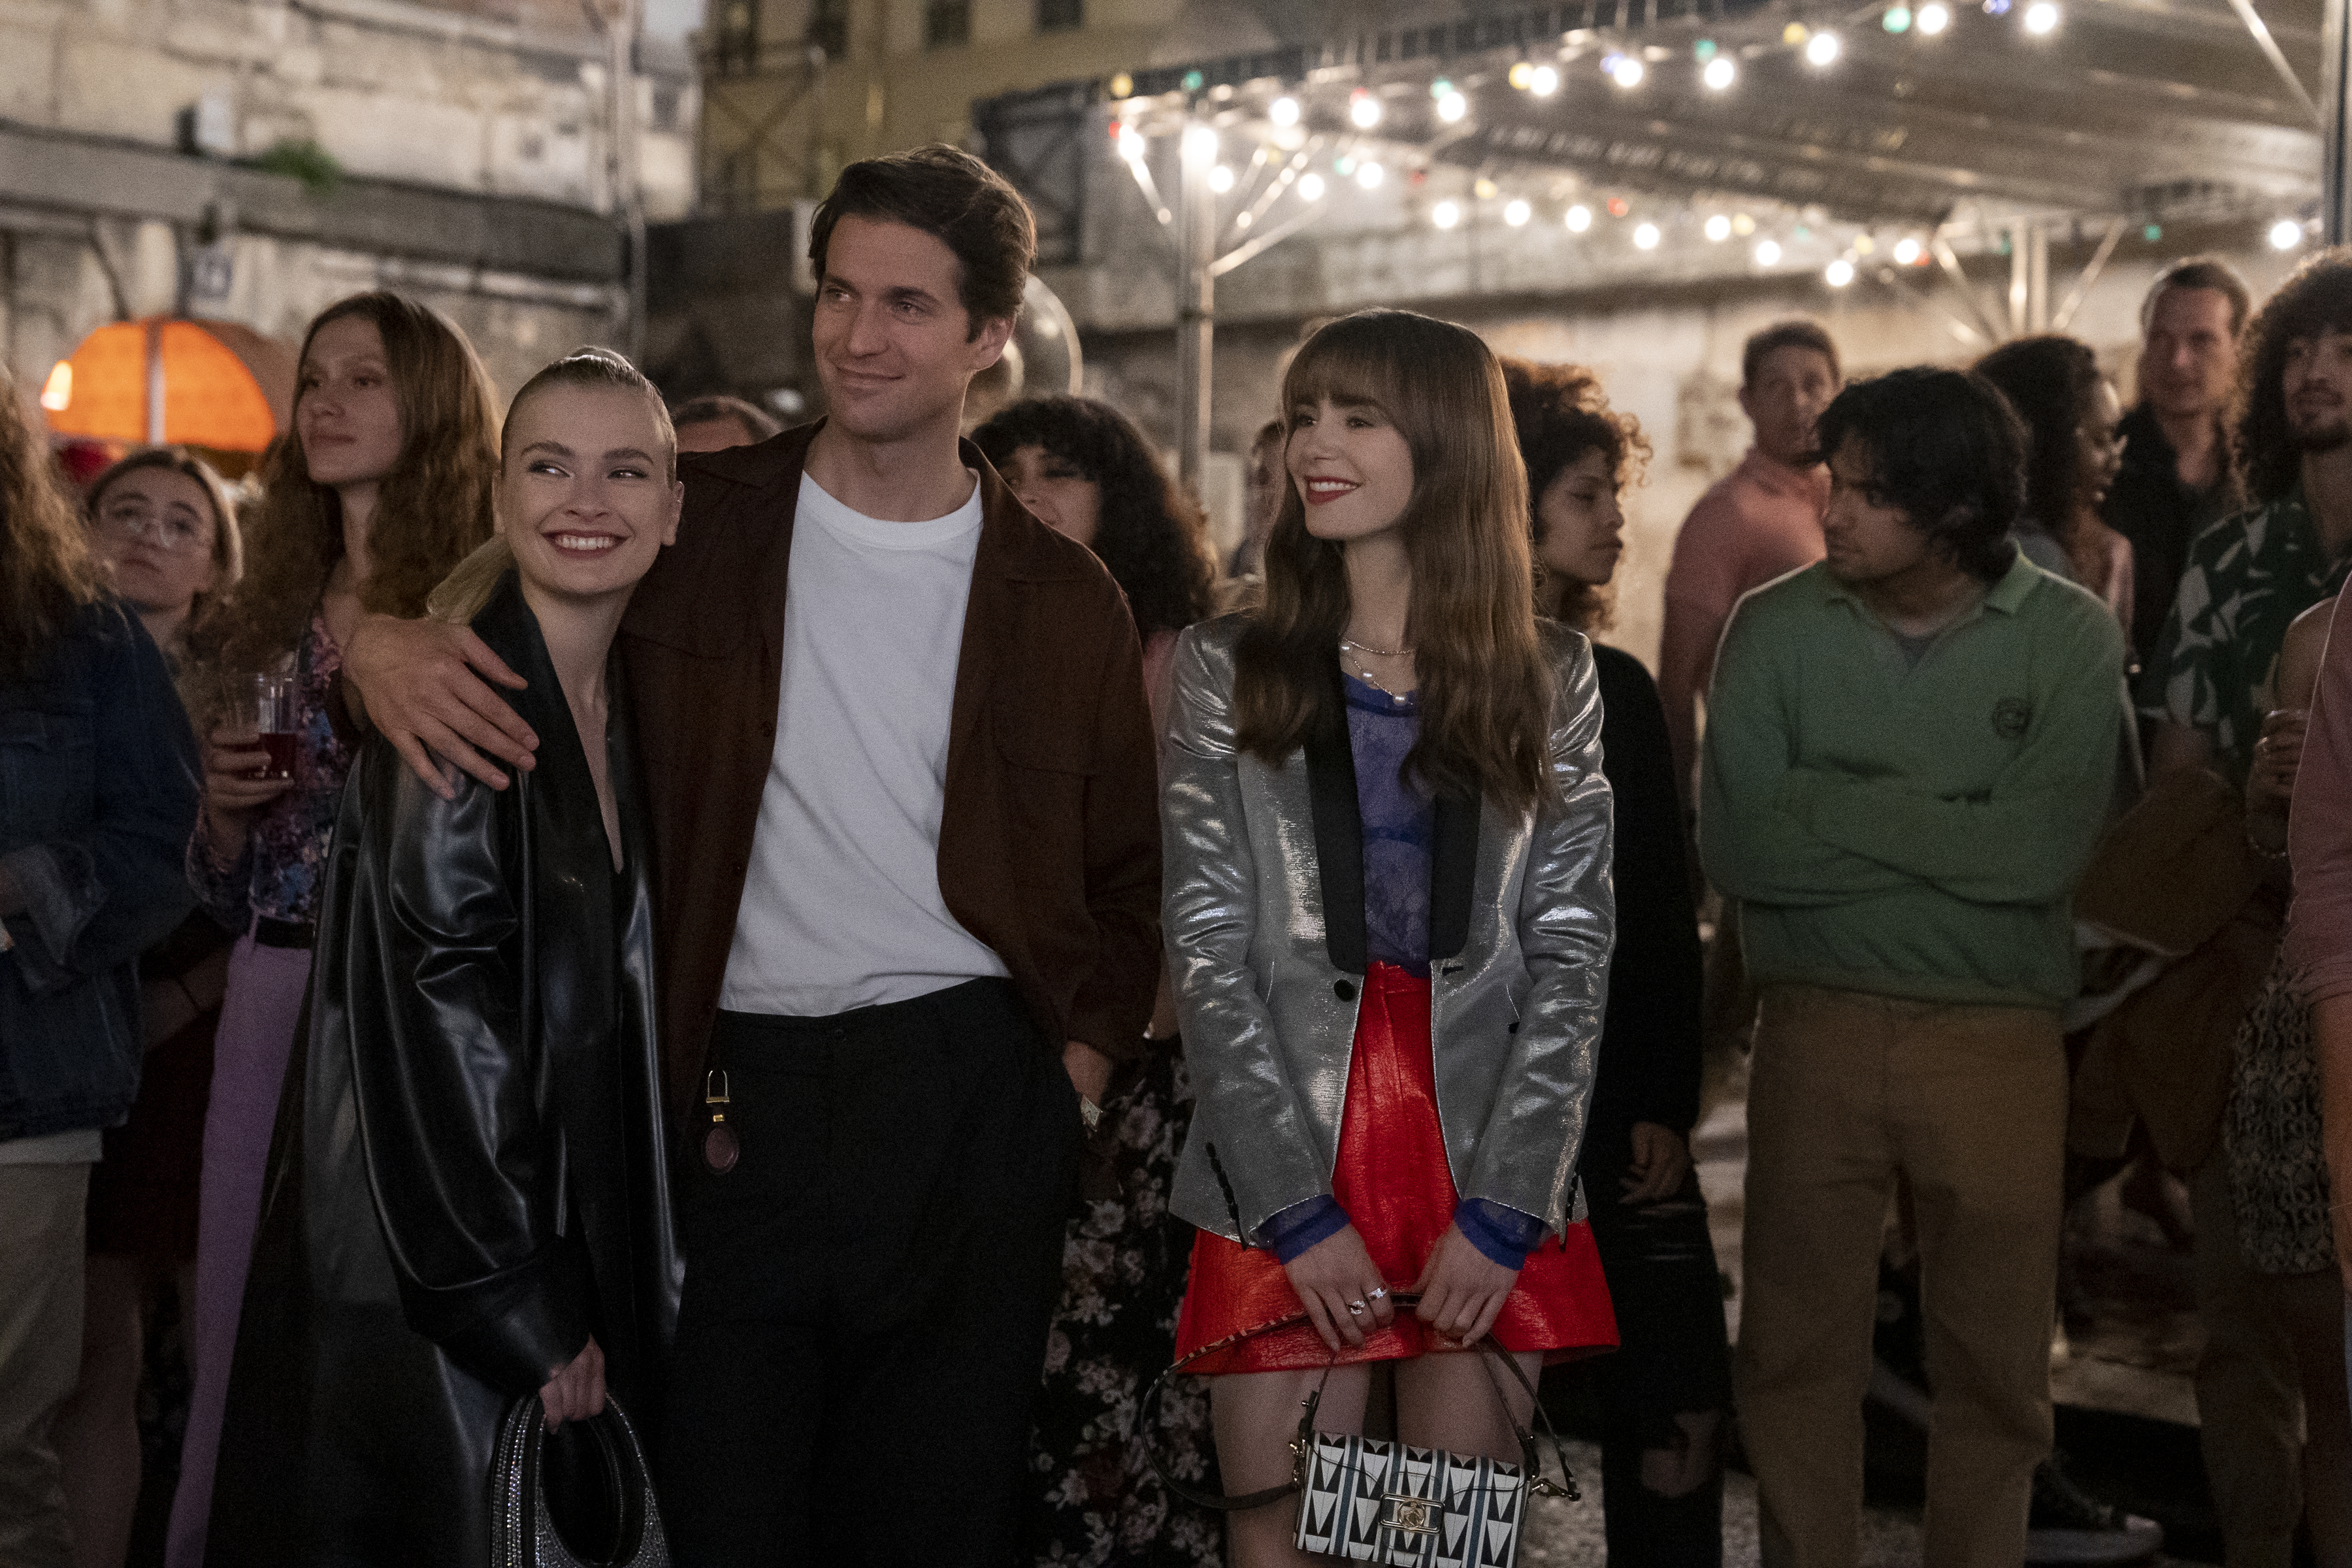 Emily in Paris season 3 review: A delightful treat made richer by the  ensemble